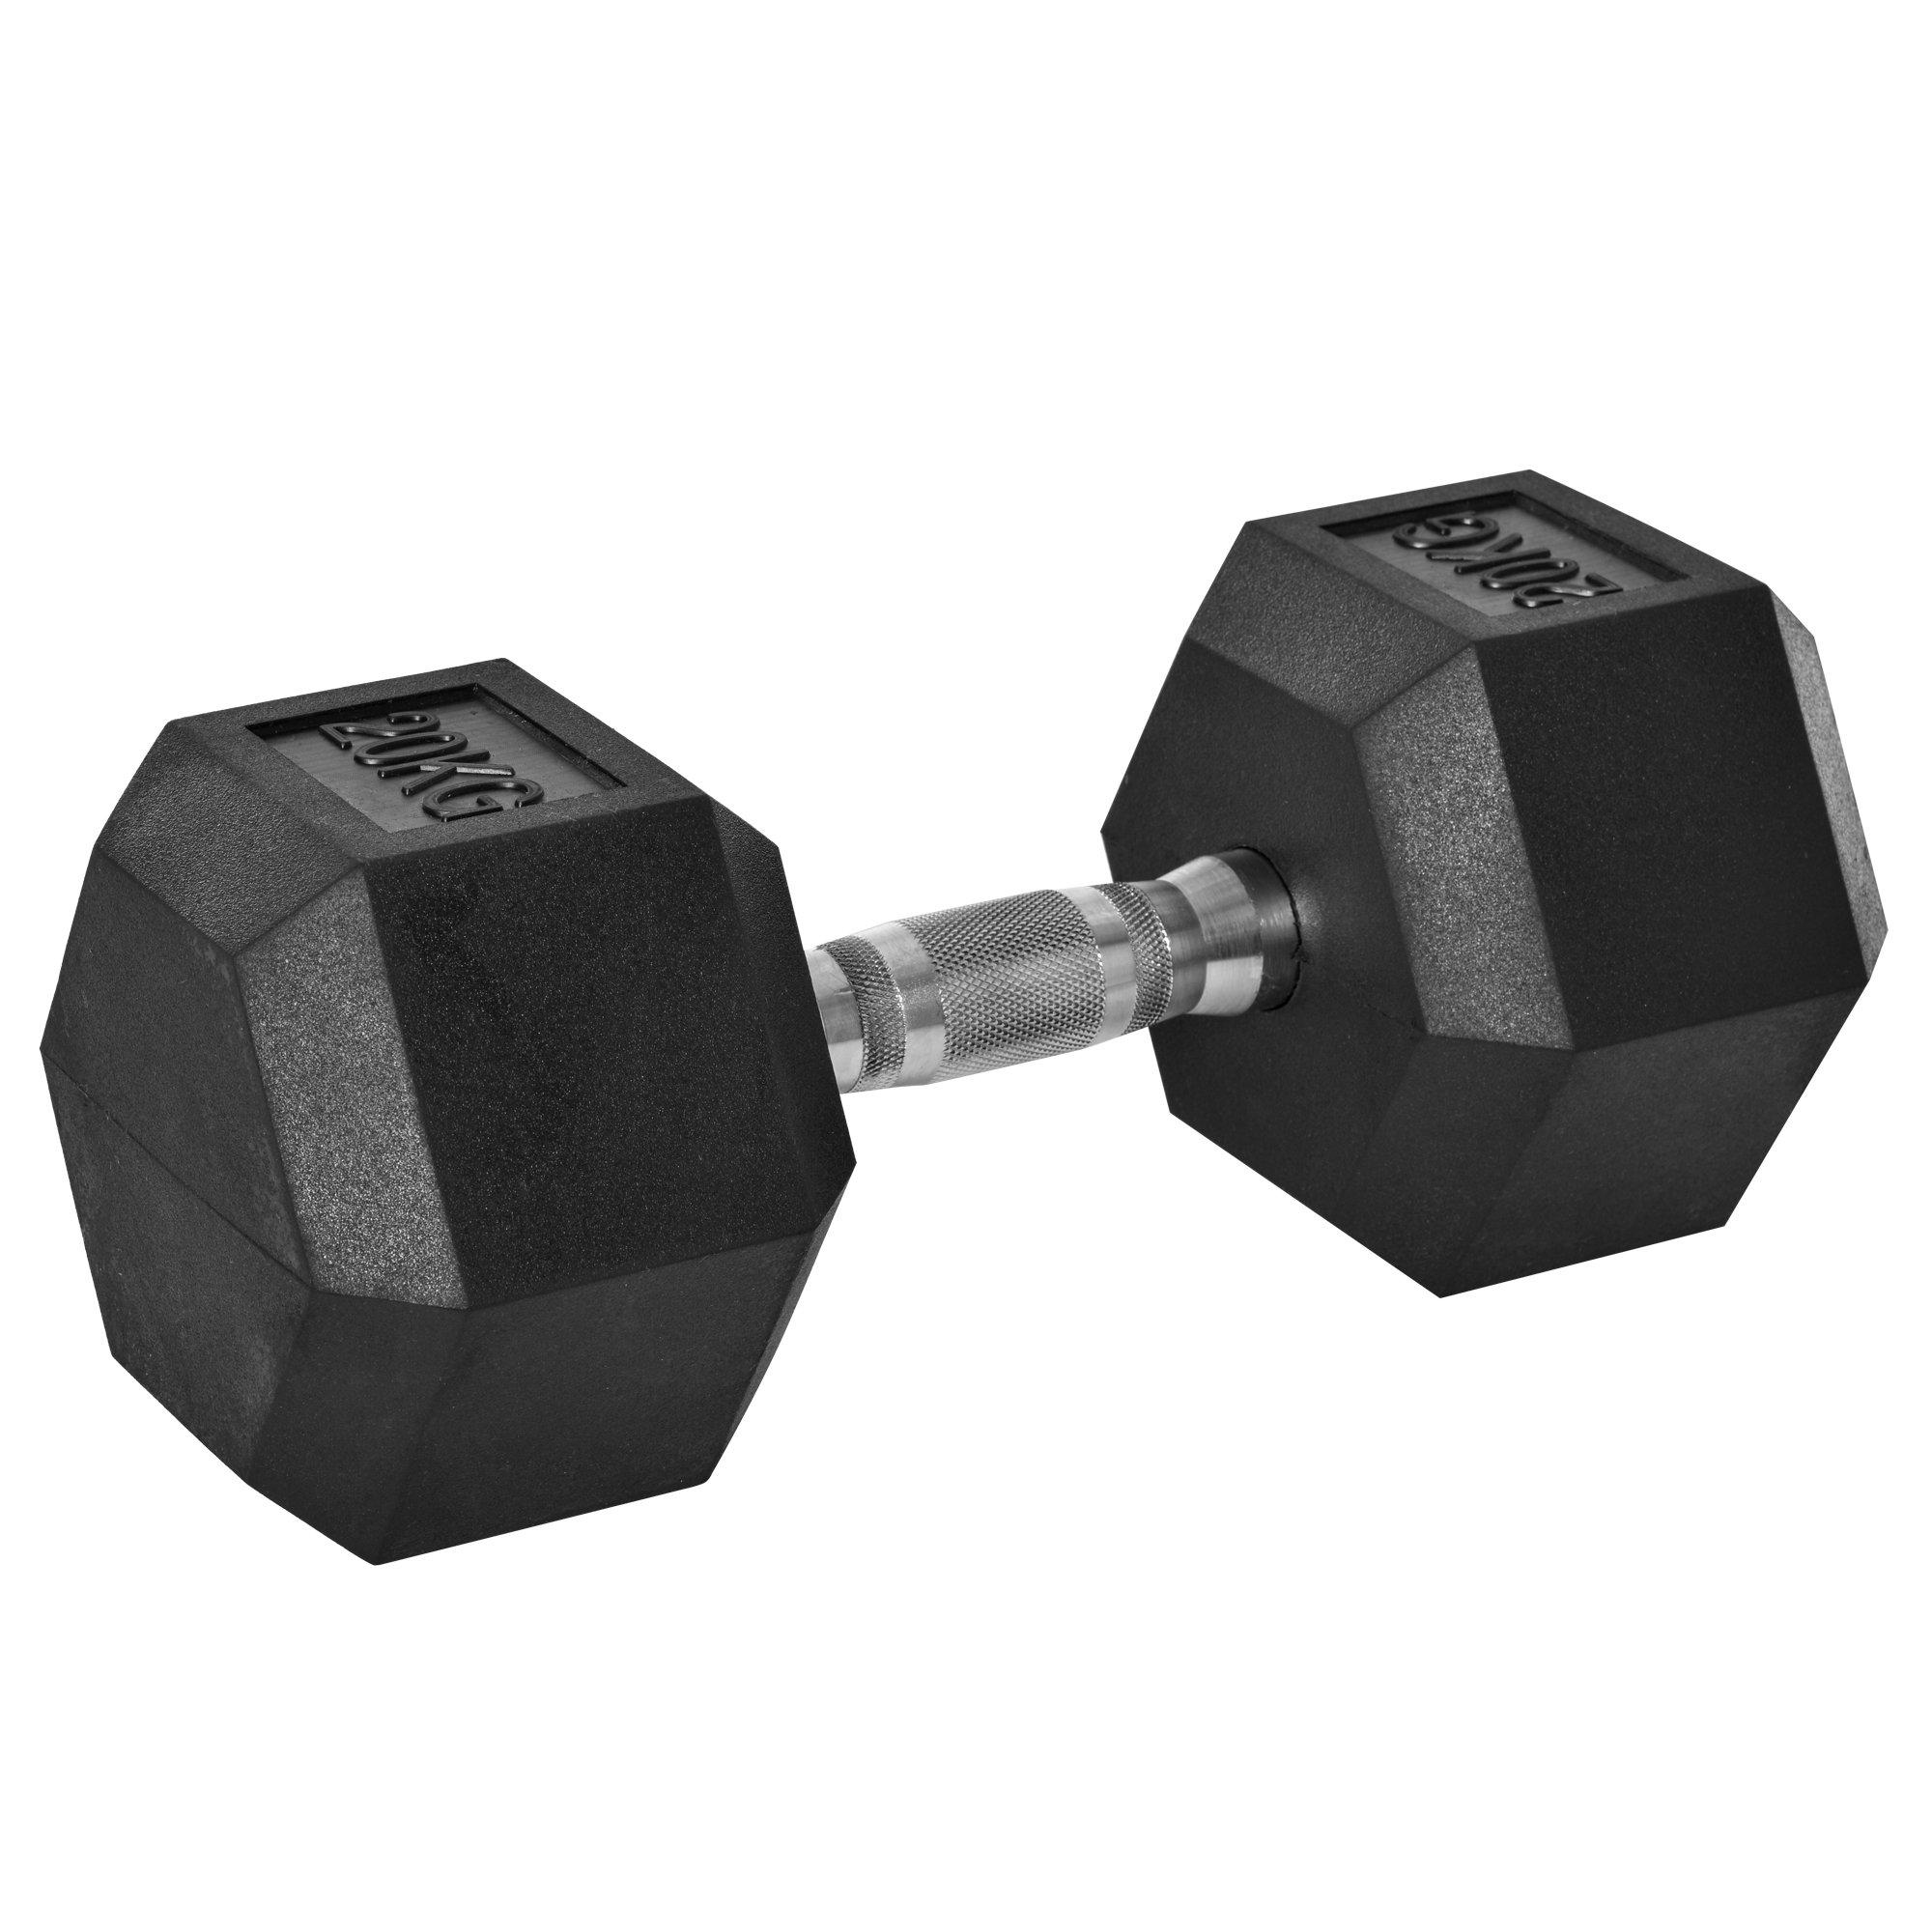 20KG Single Rubber Hex Dumbbell Portable Hand Weights Dumbbell Gym